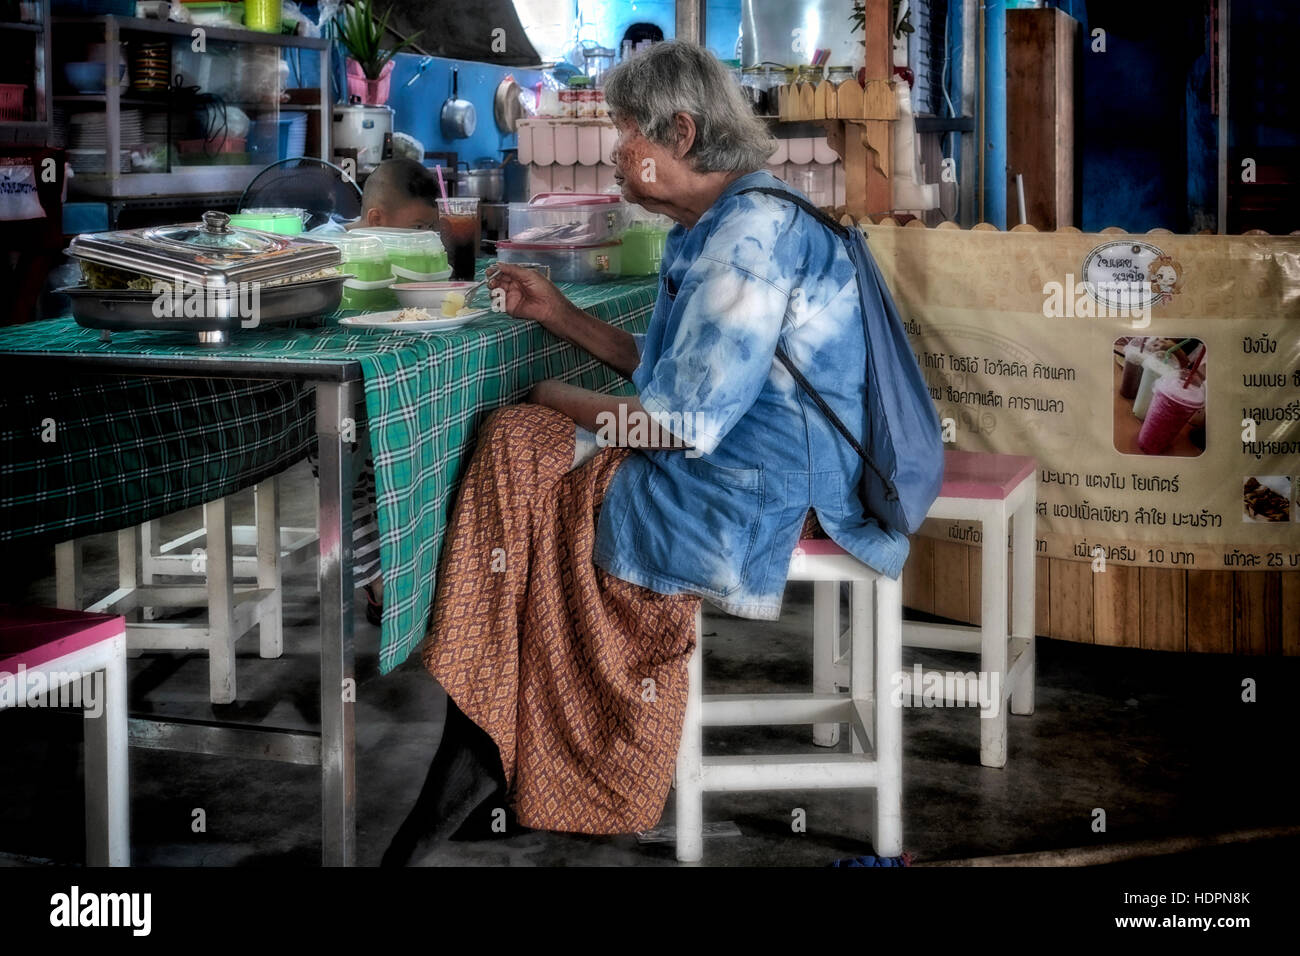 Woman alone restaurant. Thai woman eating alone in a dingy backstreet restaurant. Thailand S. E. Asia Stock Photo